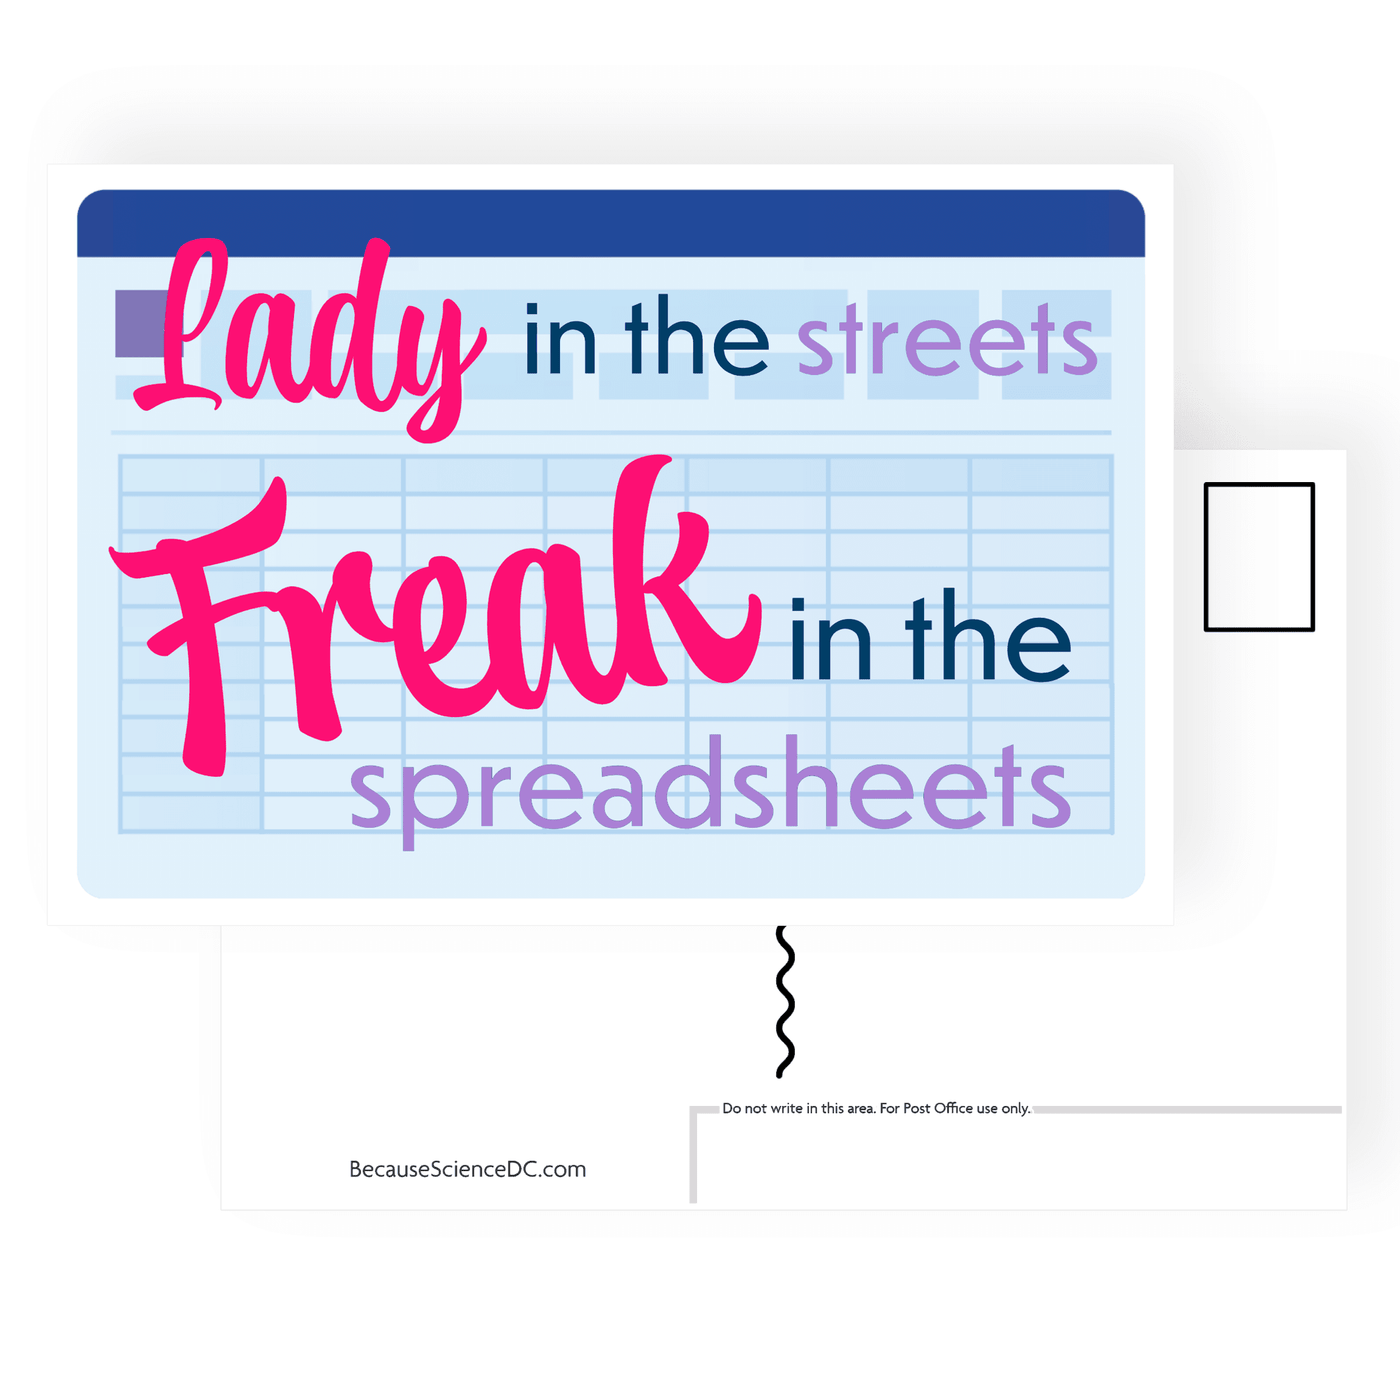 postcard of an illustration of a spreadhseet with text that says freak in the spreadsheets